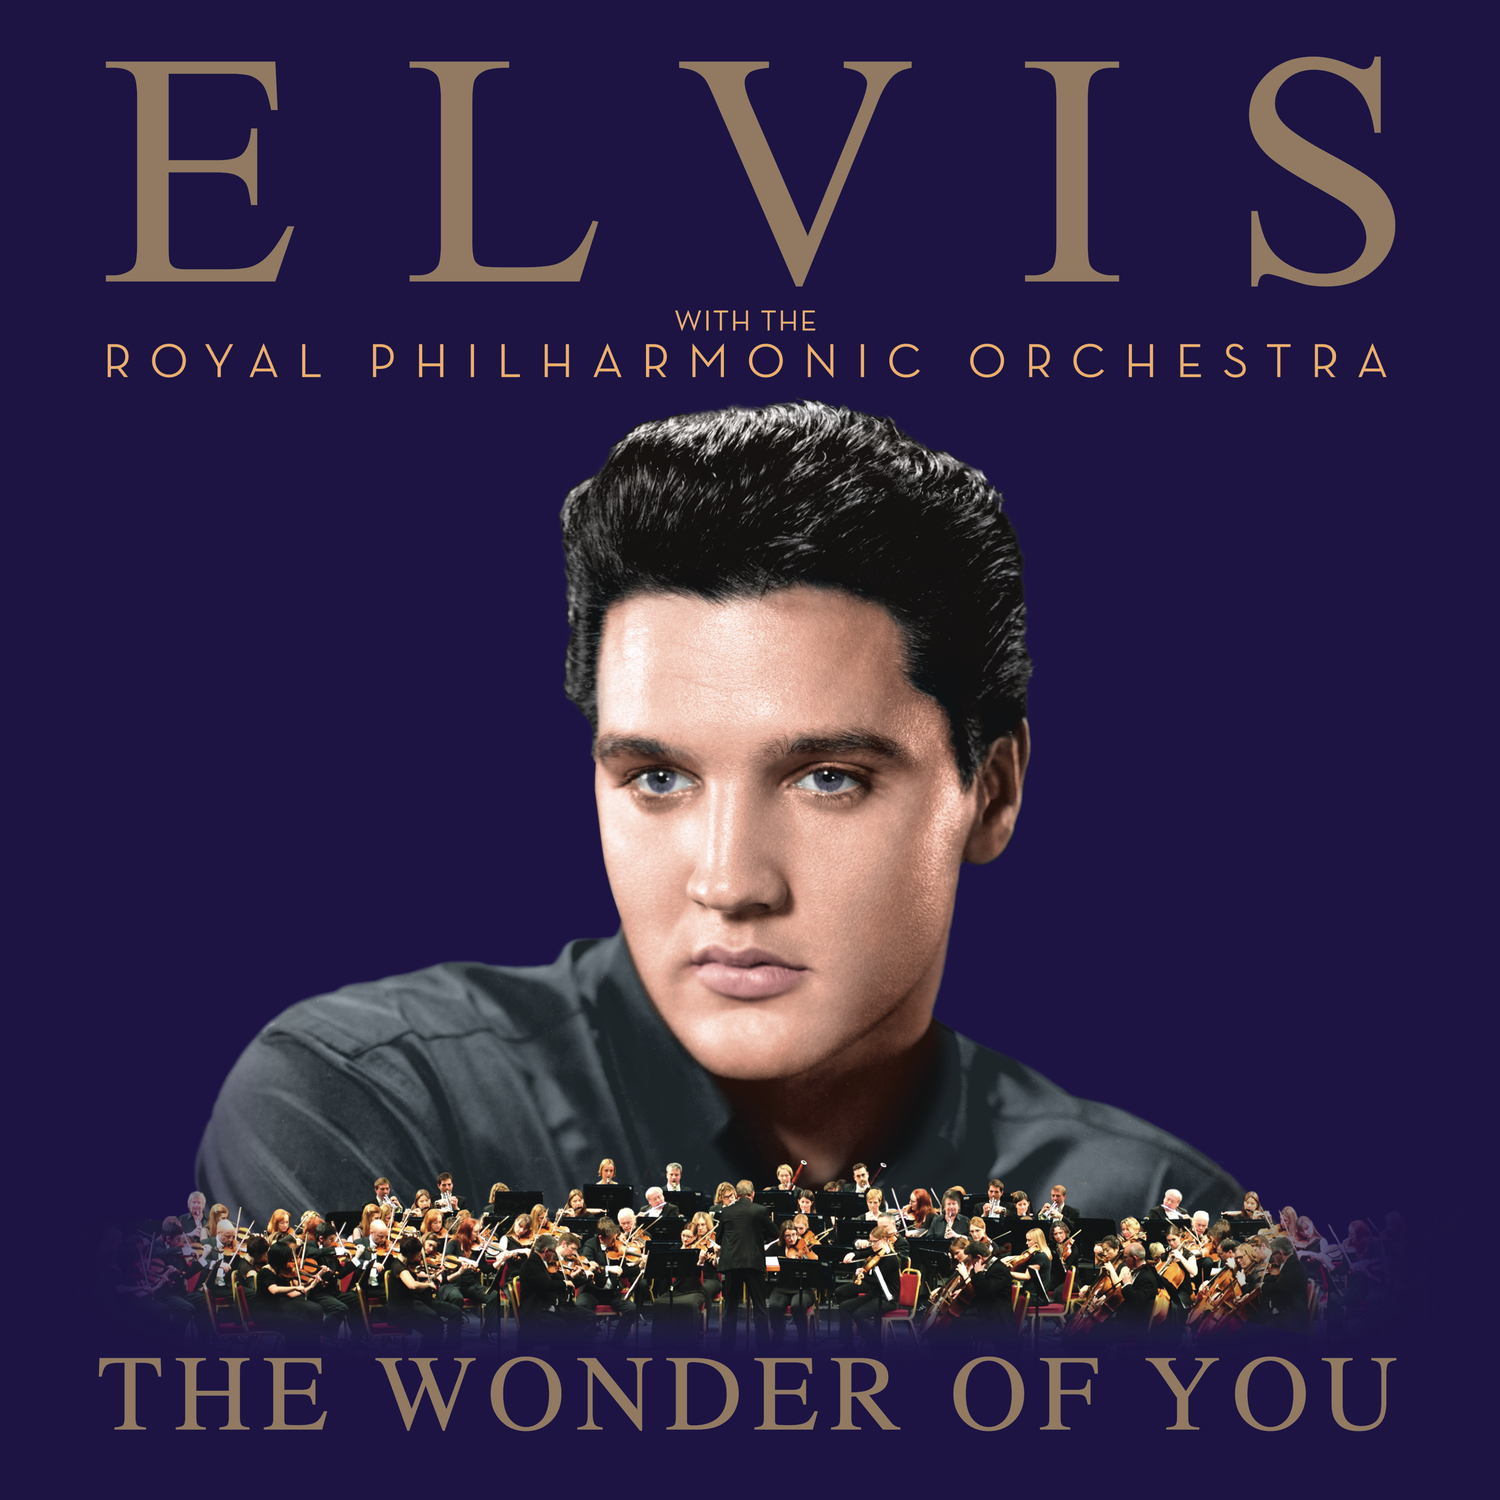 The Wonder of You: Elvis Presley with The Royal Philharmonic Orchestra vinile